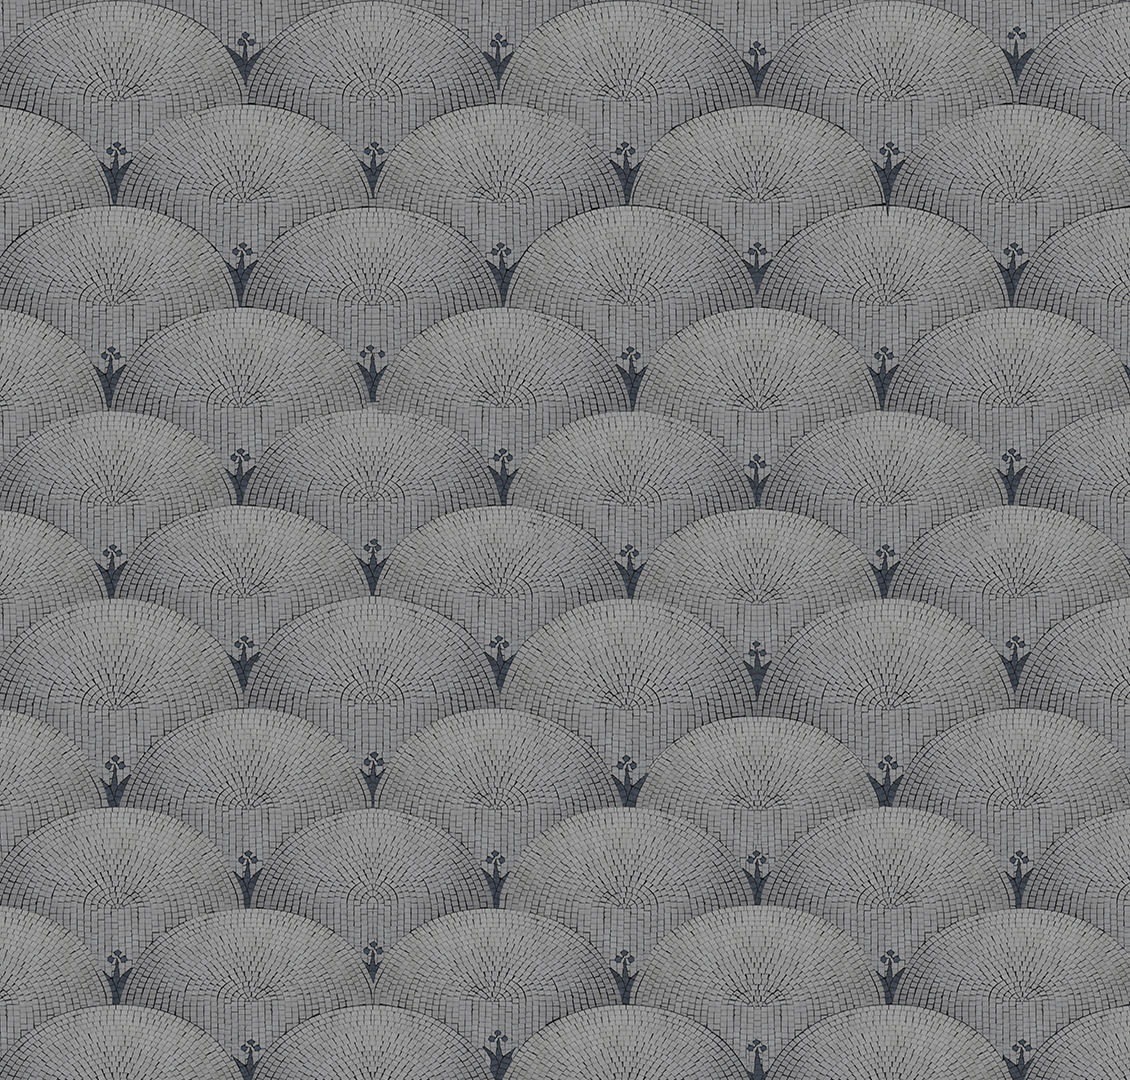 Geometric wallpaper with ancient mosaic in gray, white and blue colors